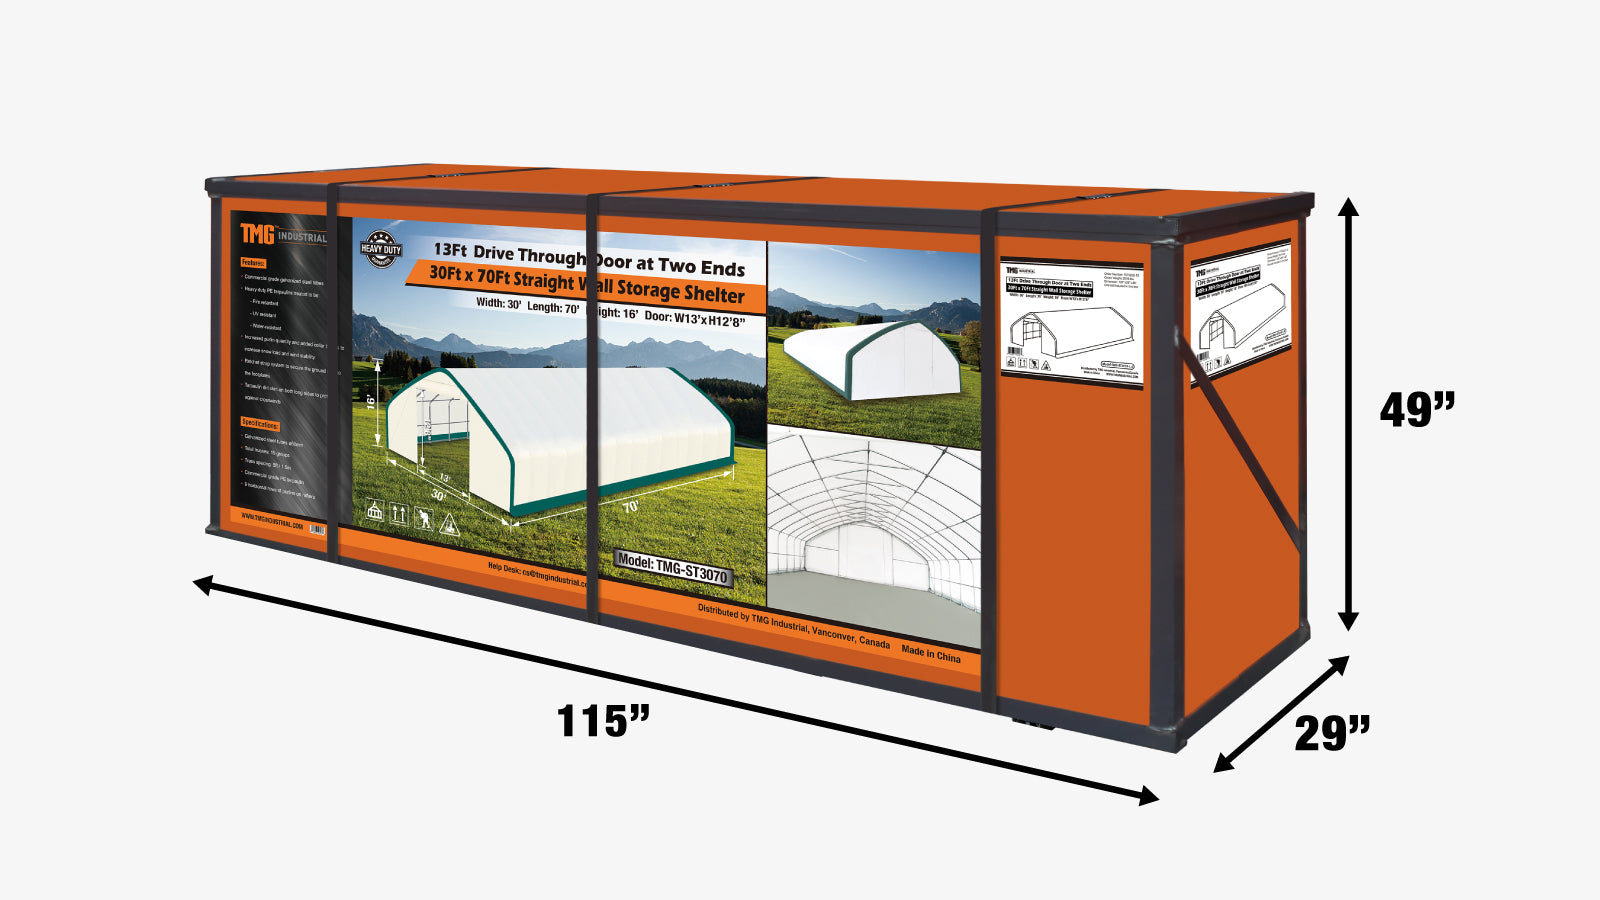 TMG Industrial 30' x 70' Straight Wall Peak Ceiling Storage Shelter with Heavy Duty 11 oz PE Cover & Drive Through Doors, TMG-ST3070E(Previously ST3070)-shipping-info-image